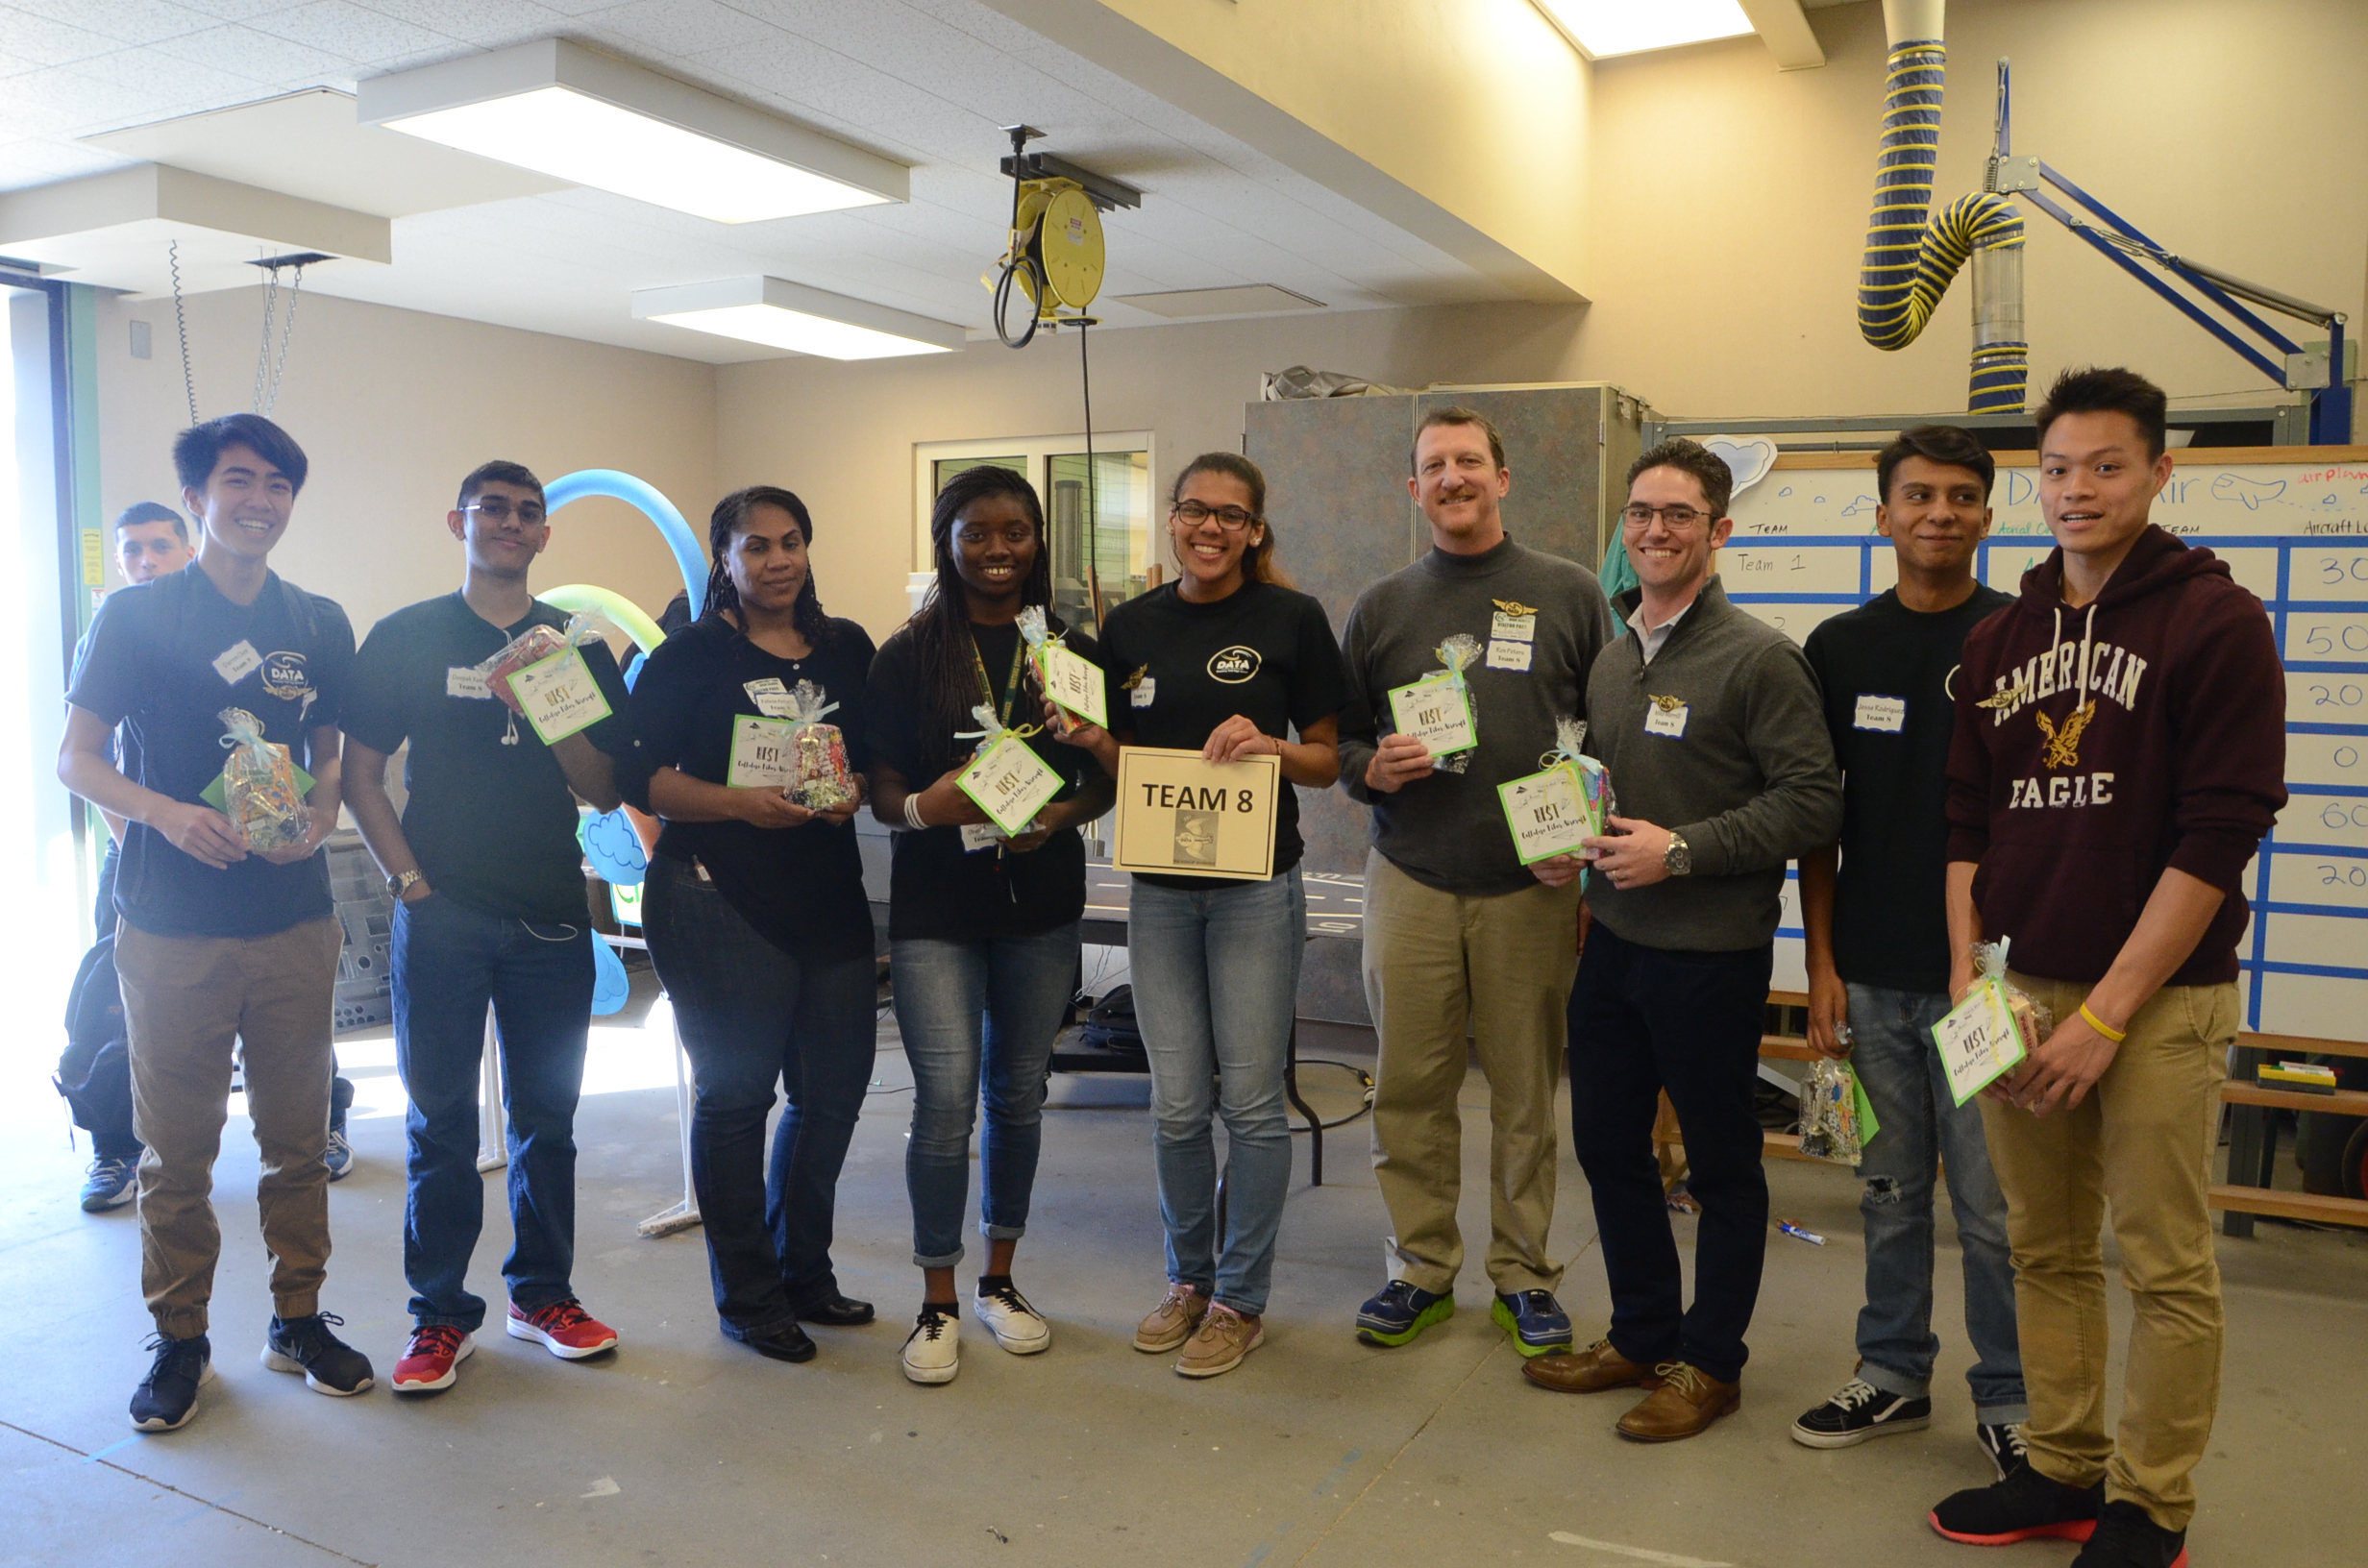 In this photo, you can see that those participating in the competition earned a special set of golden DATA wings, which were designed by DATA student Brittney Morgan and created using a 3D printer.